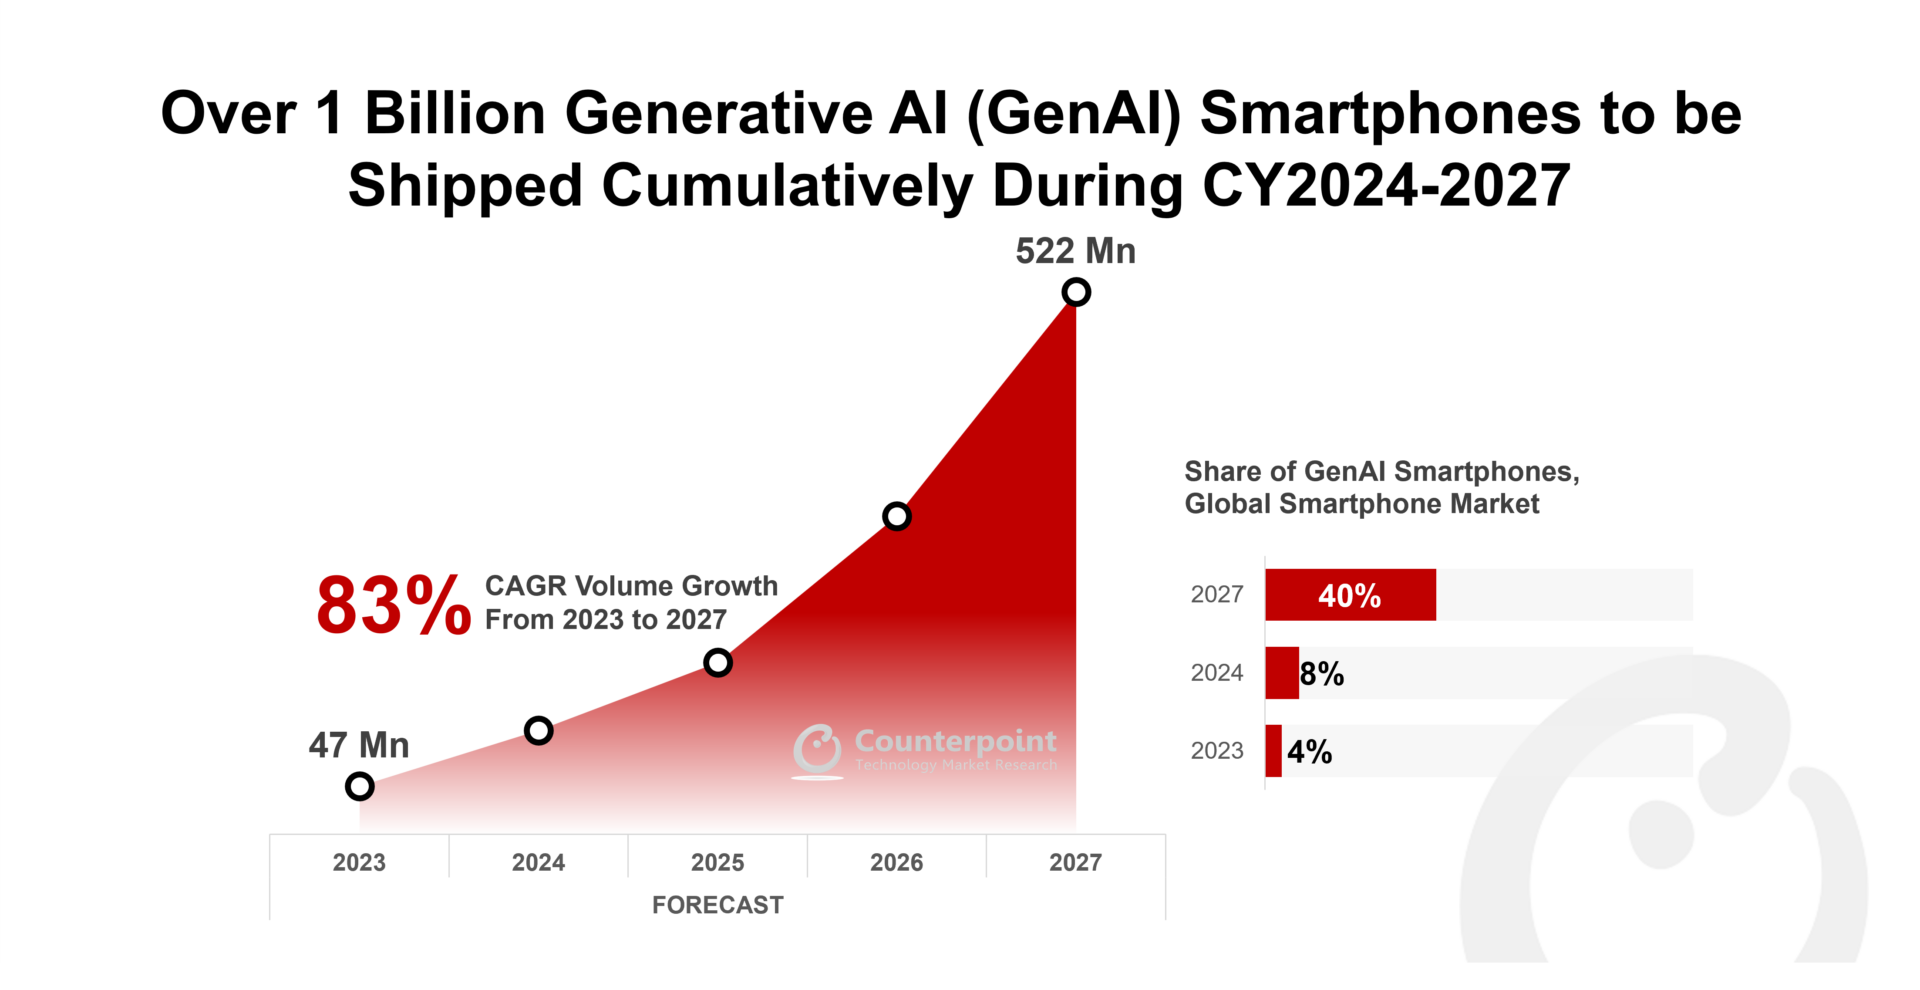 Over 1 Billion Generative AI (GenAI) Smartphones to be Shipped Cumulatively During CY2024-2027